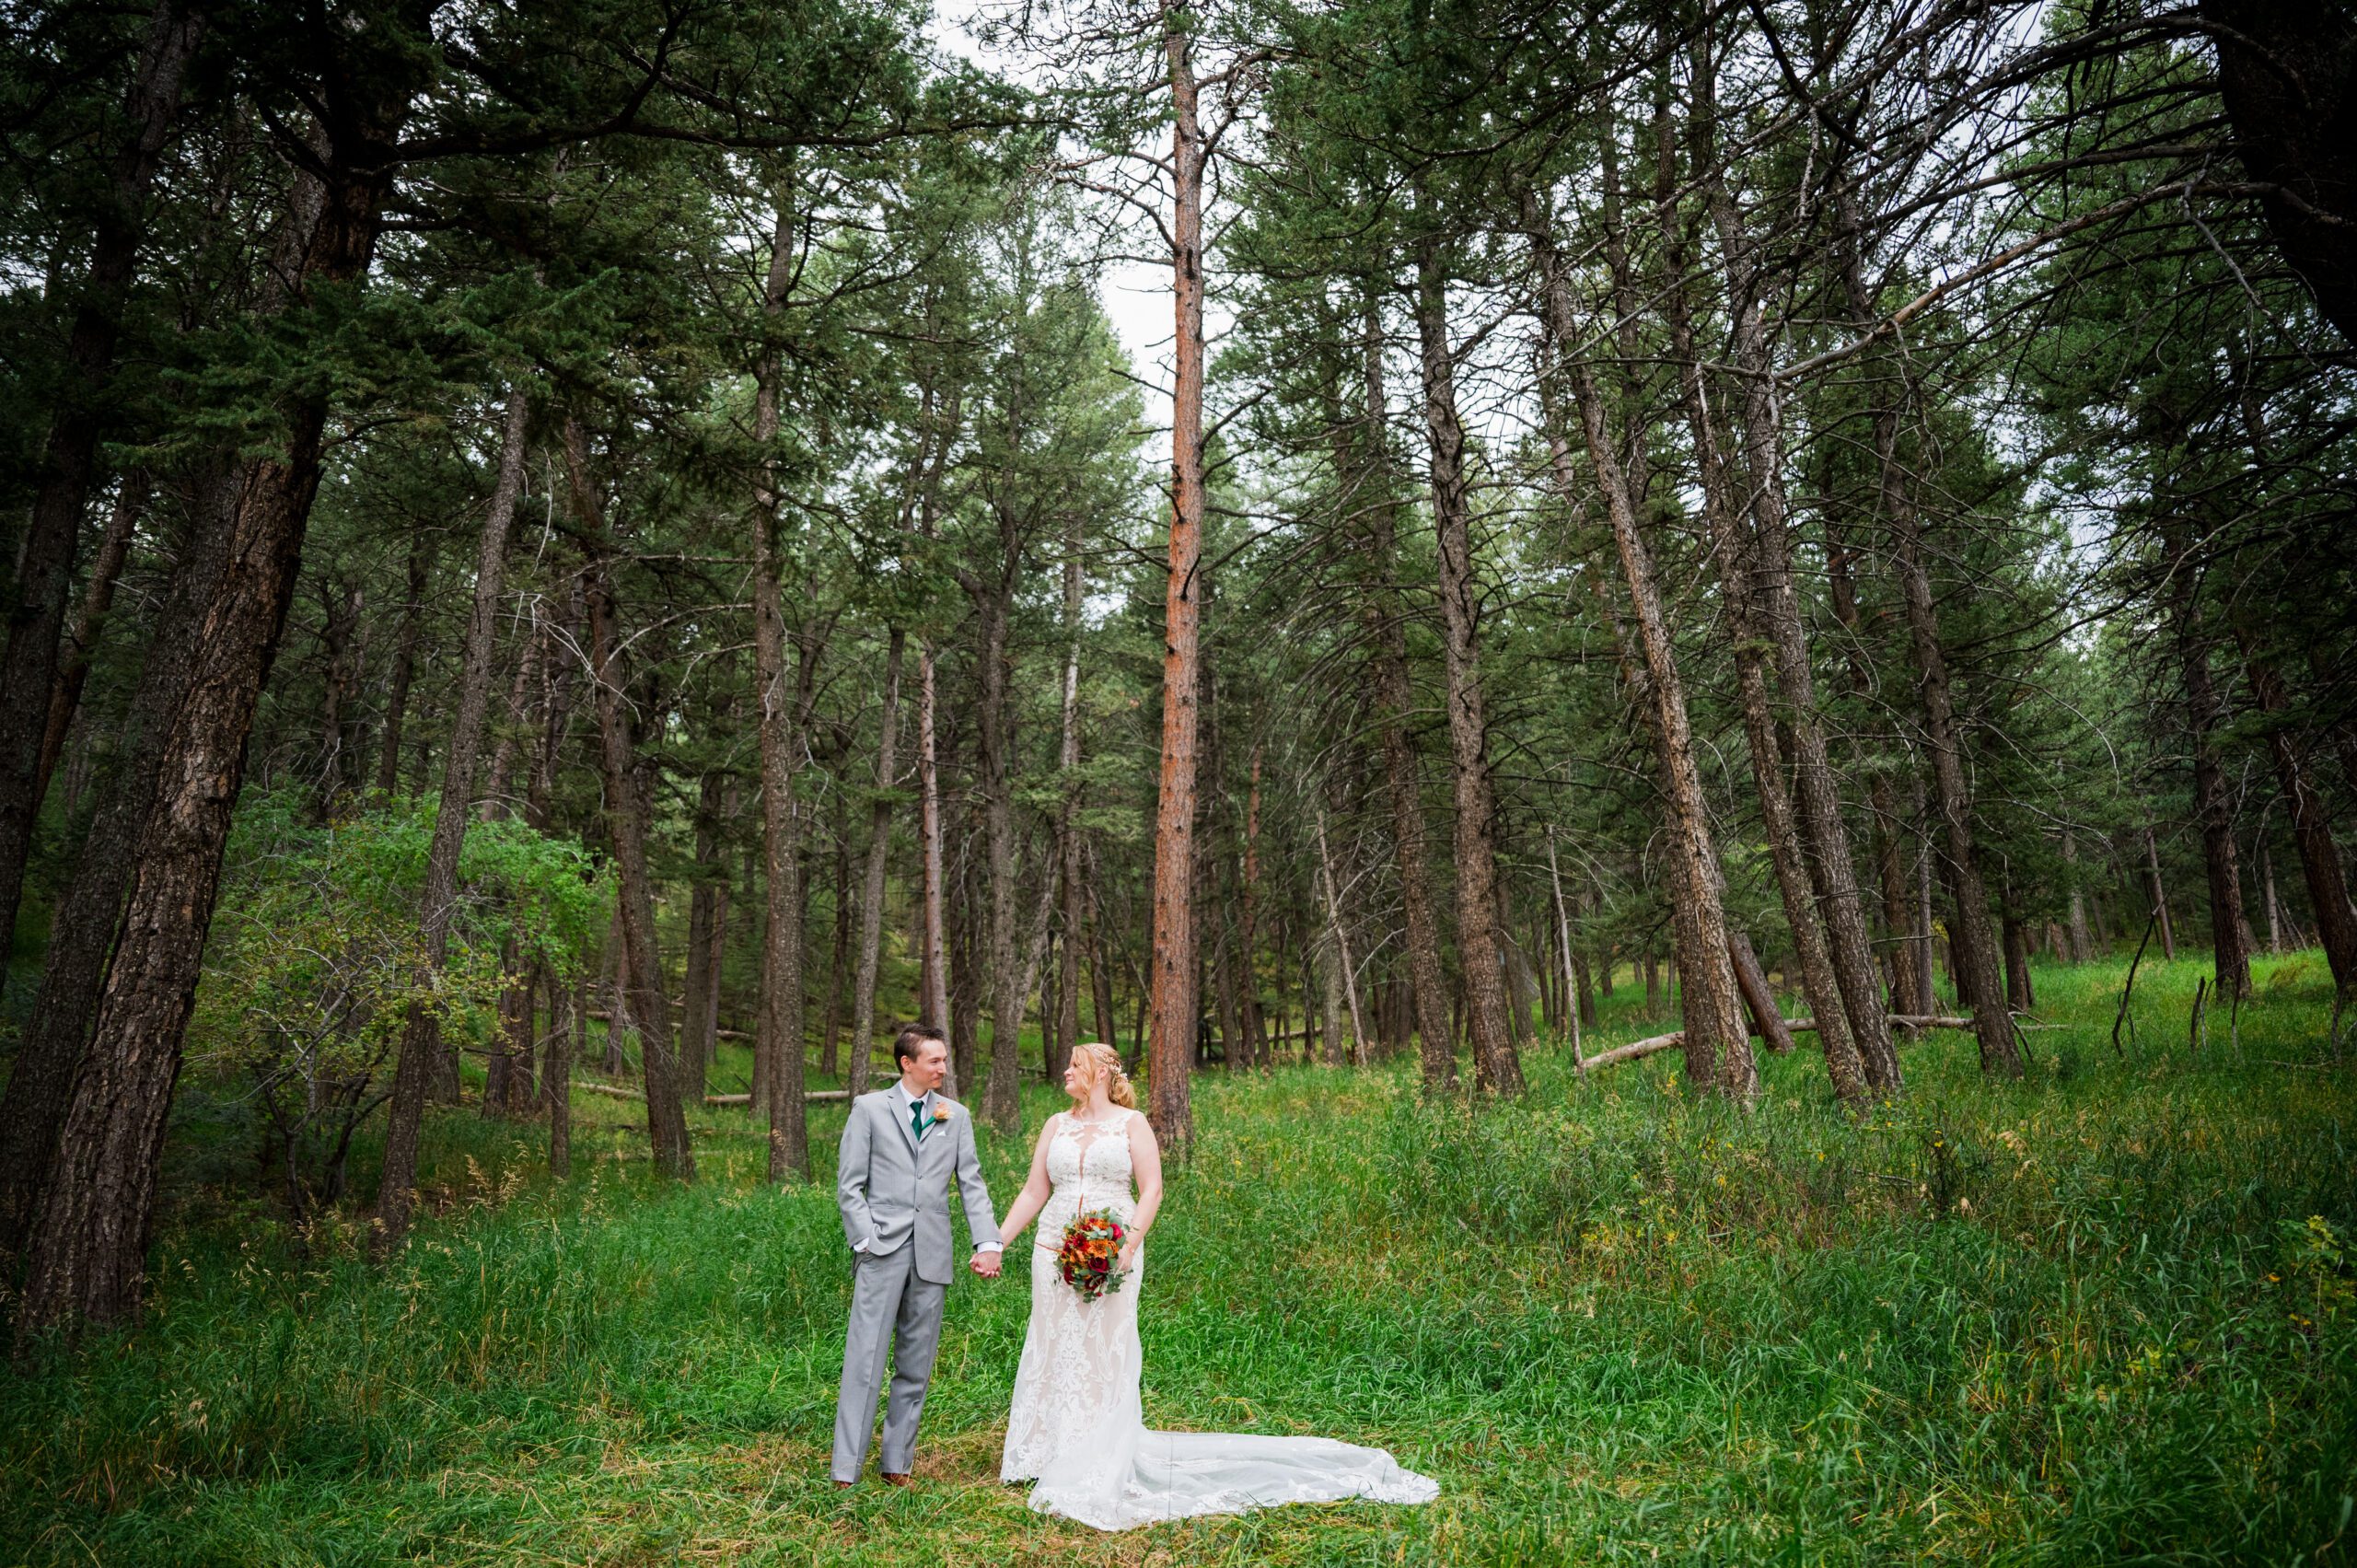 A bride and groom stand hand in hand looking at each other standing in a pine forest.